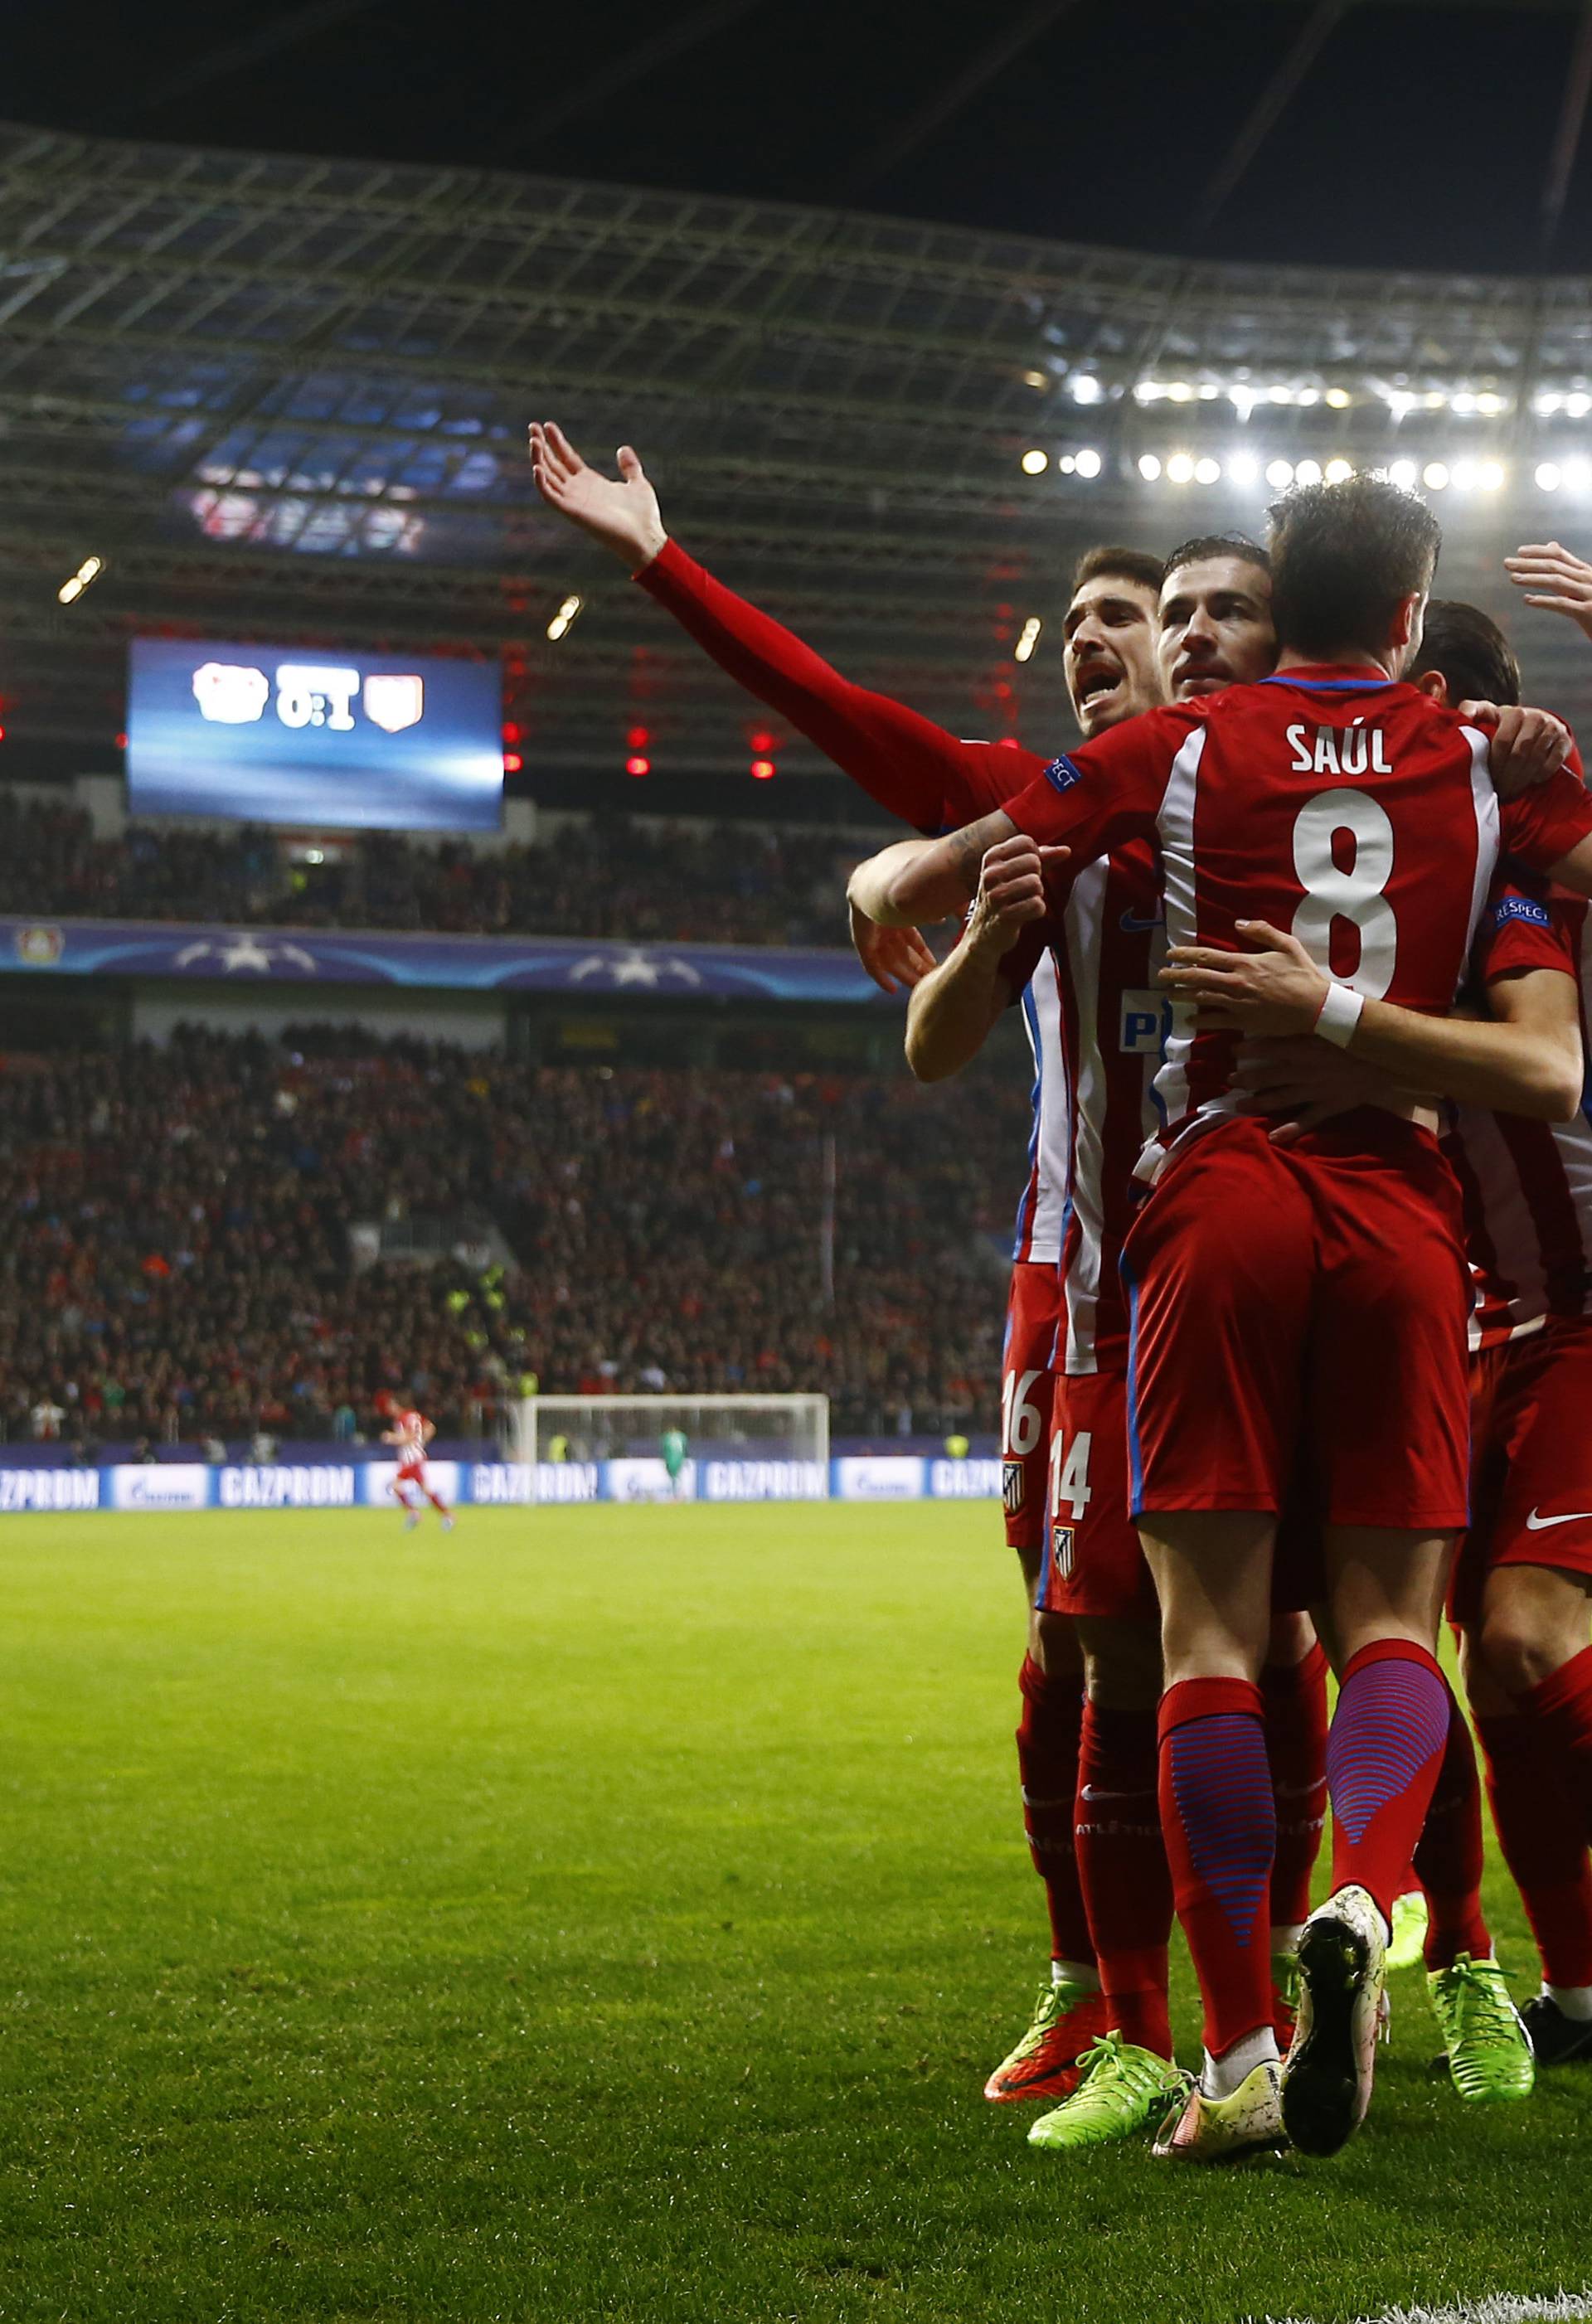 Atletico Madrid's Saul Niguez celebrates scoring their first goal with teammates